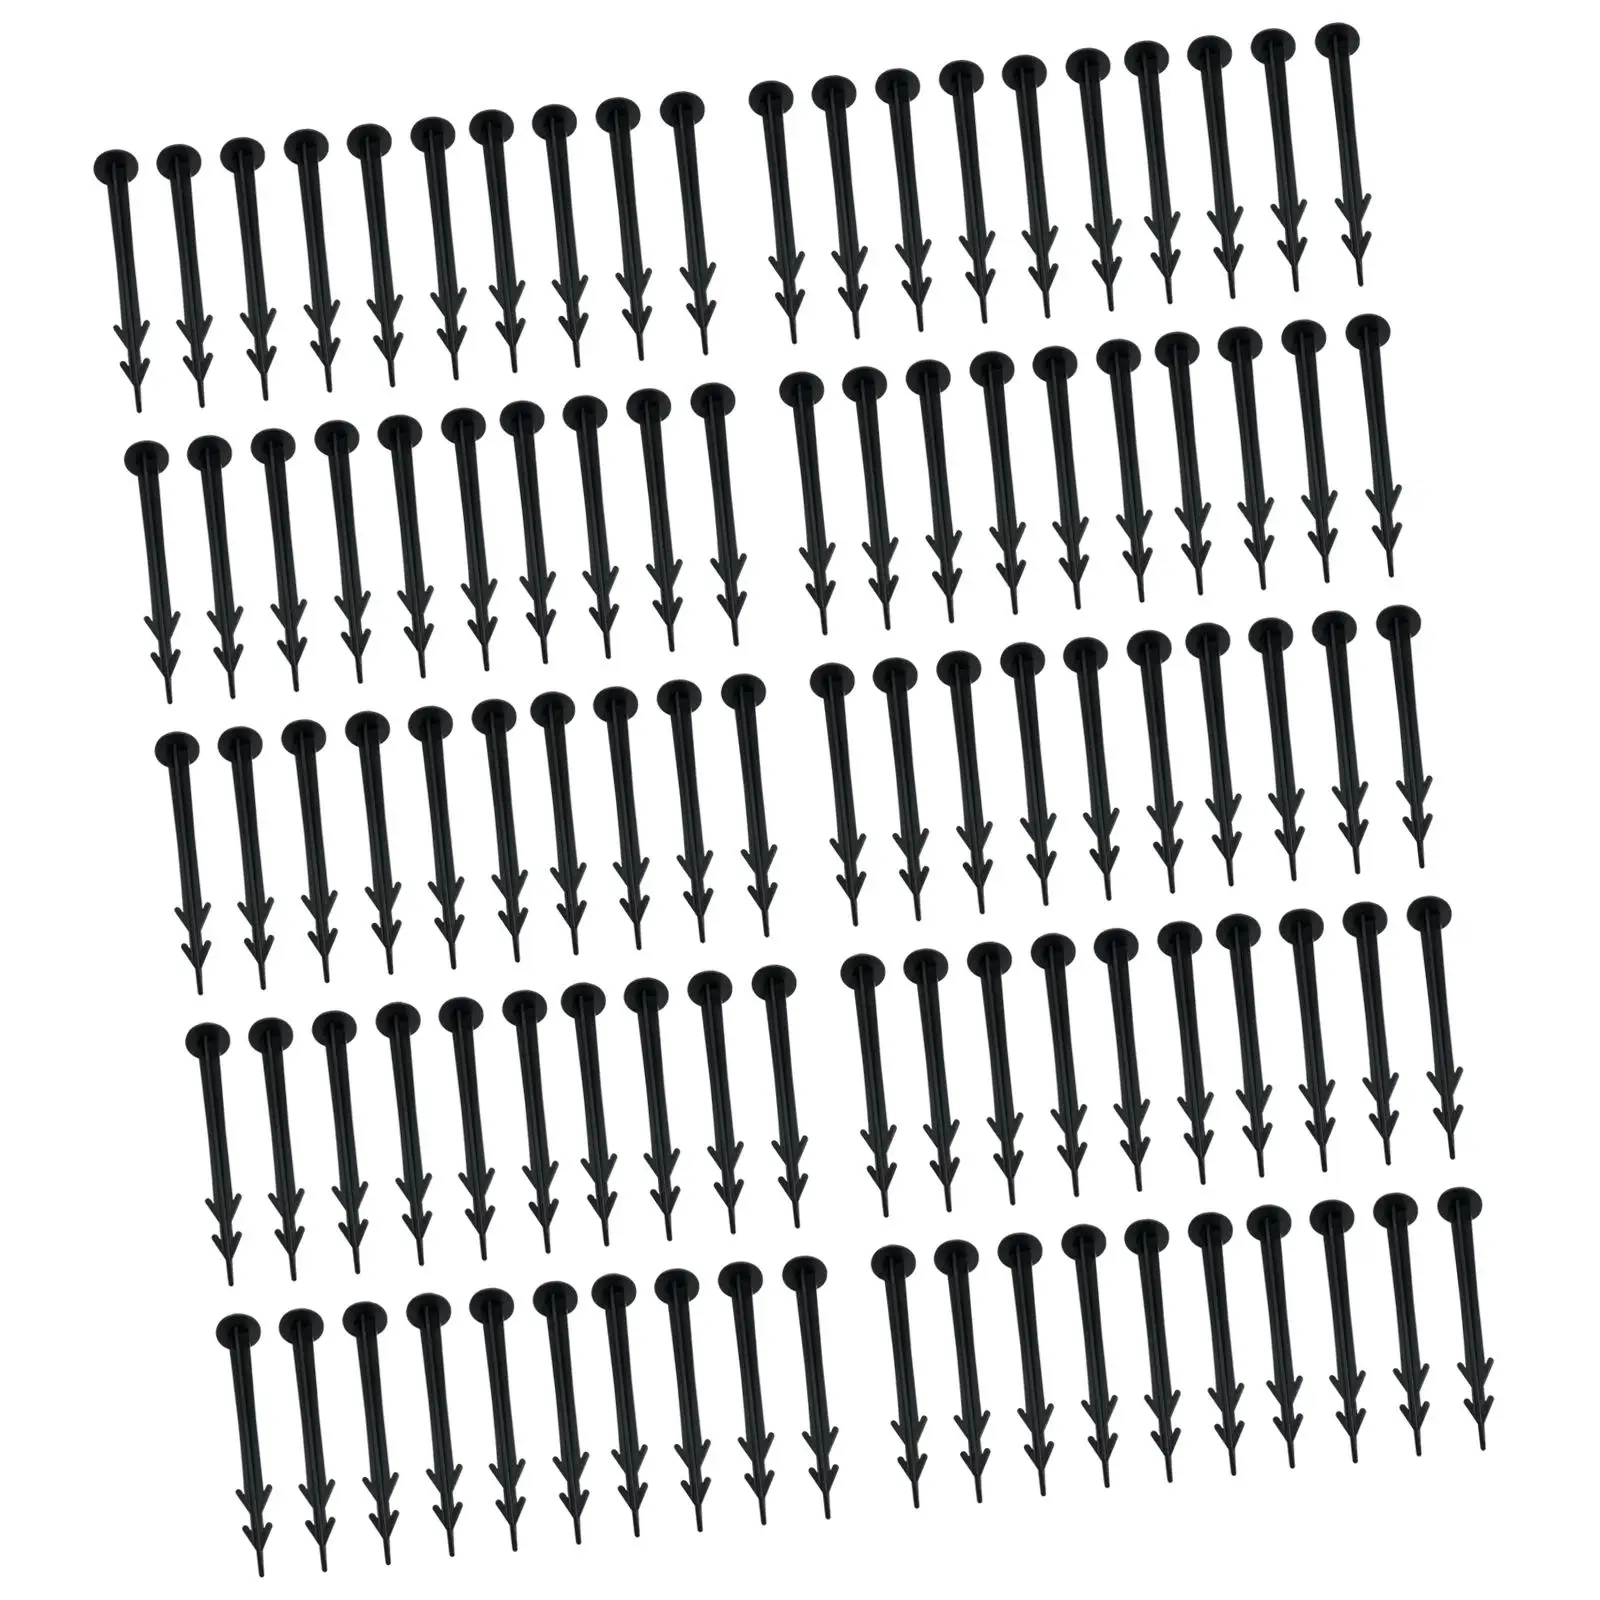 100Pcs Garden Stakes Landscape Nails Anchor Ground Stakes Fixing Anchor Pegs for Fabric Lawn Edging Keeping Garden Netting Down